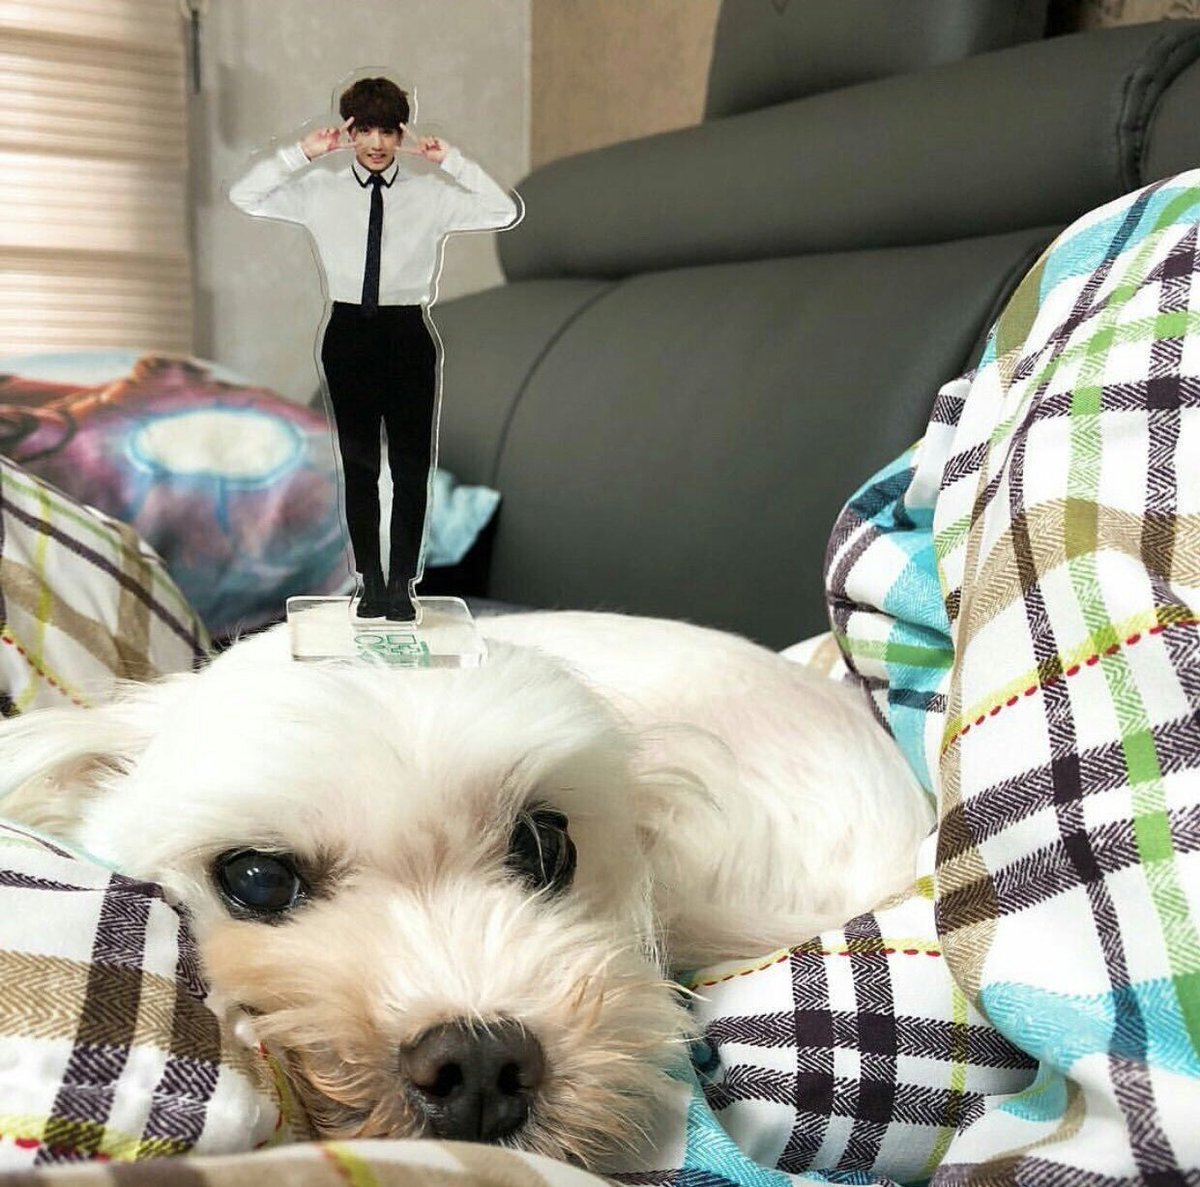 jungkook’s dog, gureum was a street dog he and his family rescued and have been taking care of since then, he cares so much about it, an angel :(